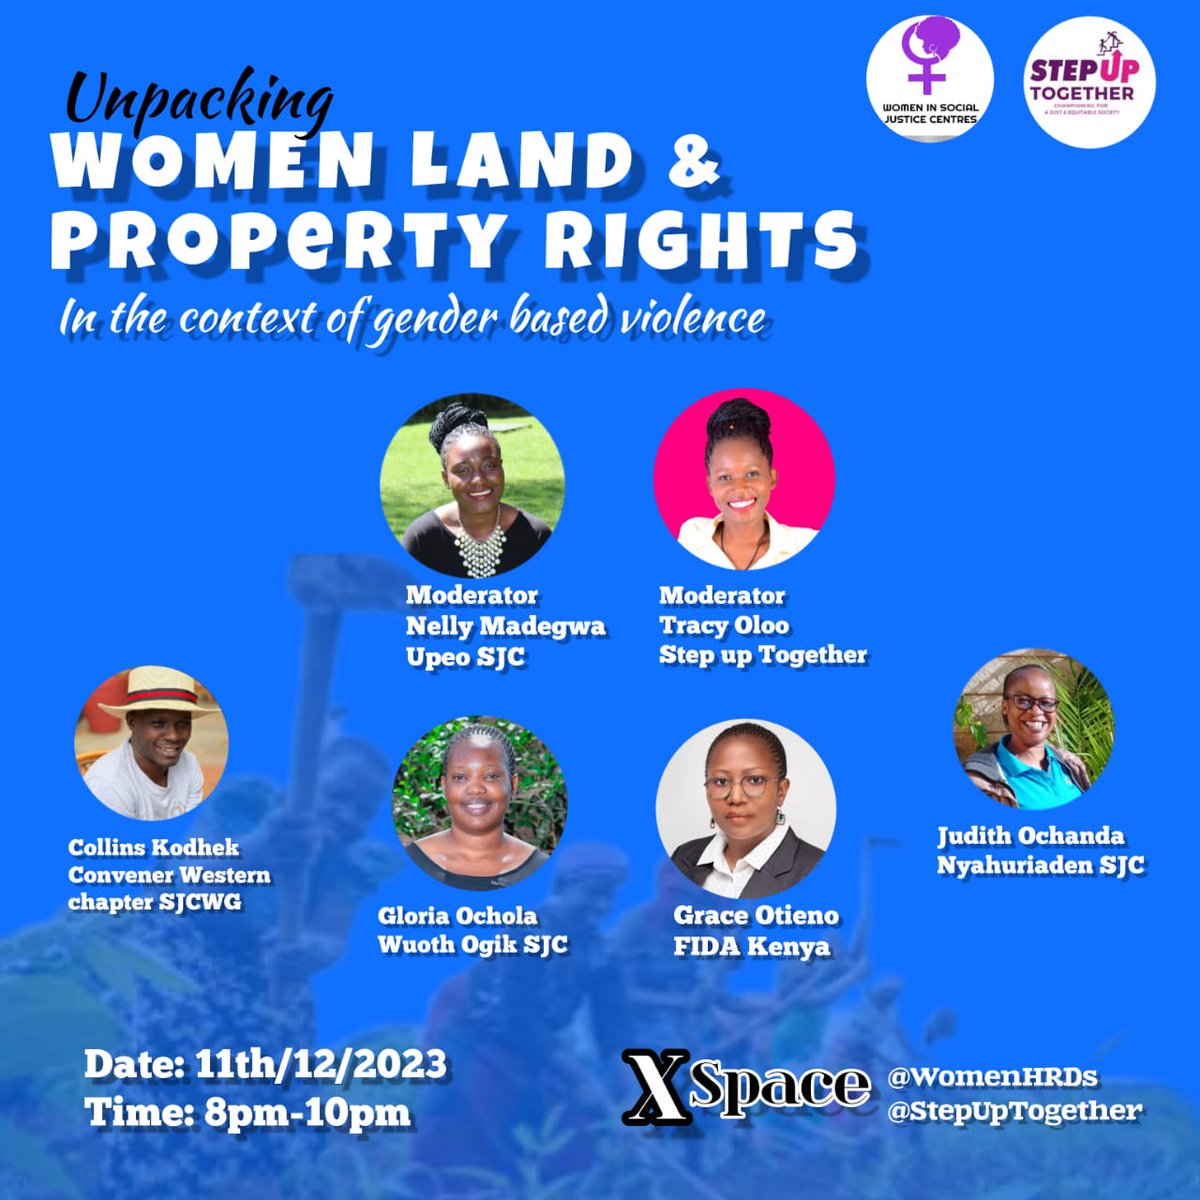 Let's join the twitter space tonight #FoodSecurity #Landfoodandfreedom @UhaiWetu @WomenHRDs @equalitynow @Article43Rights @StepupTogether